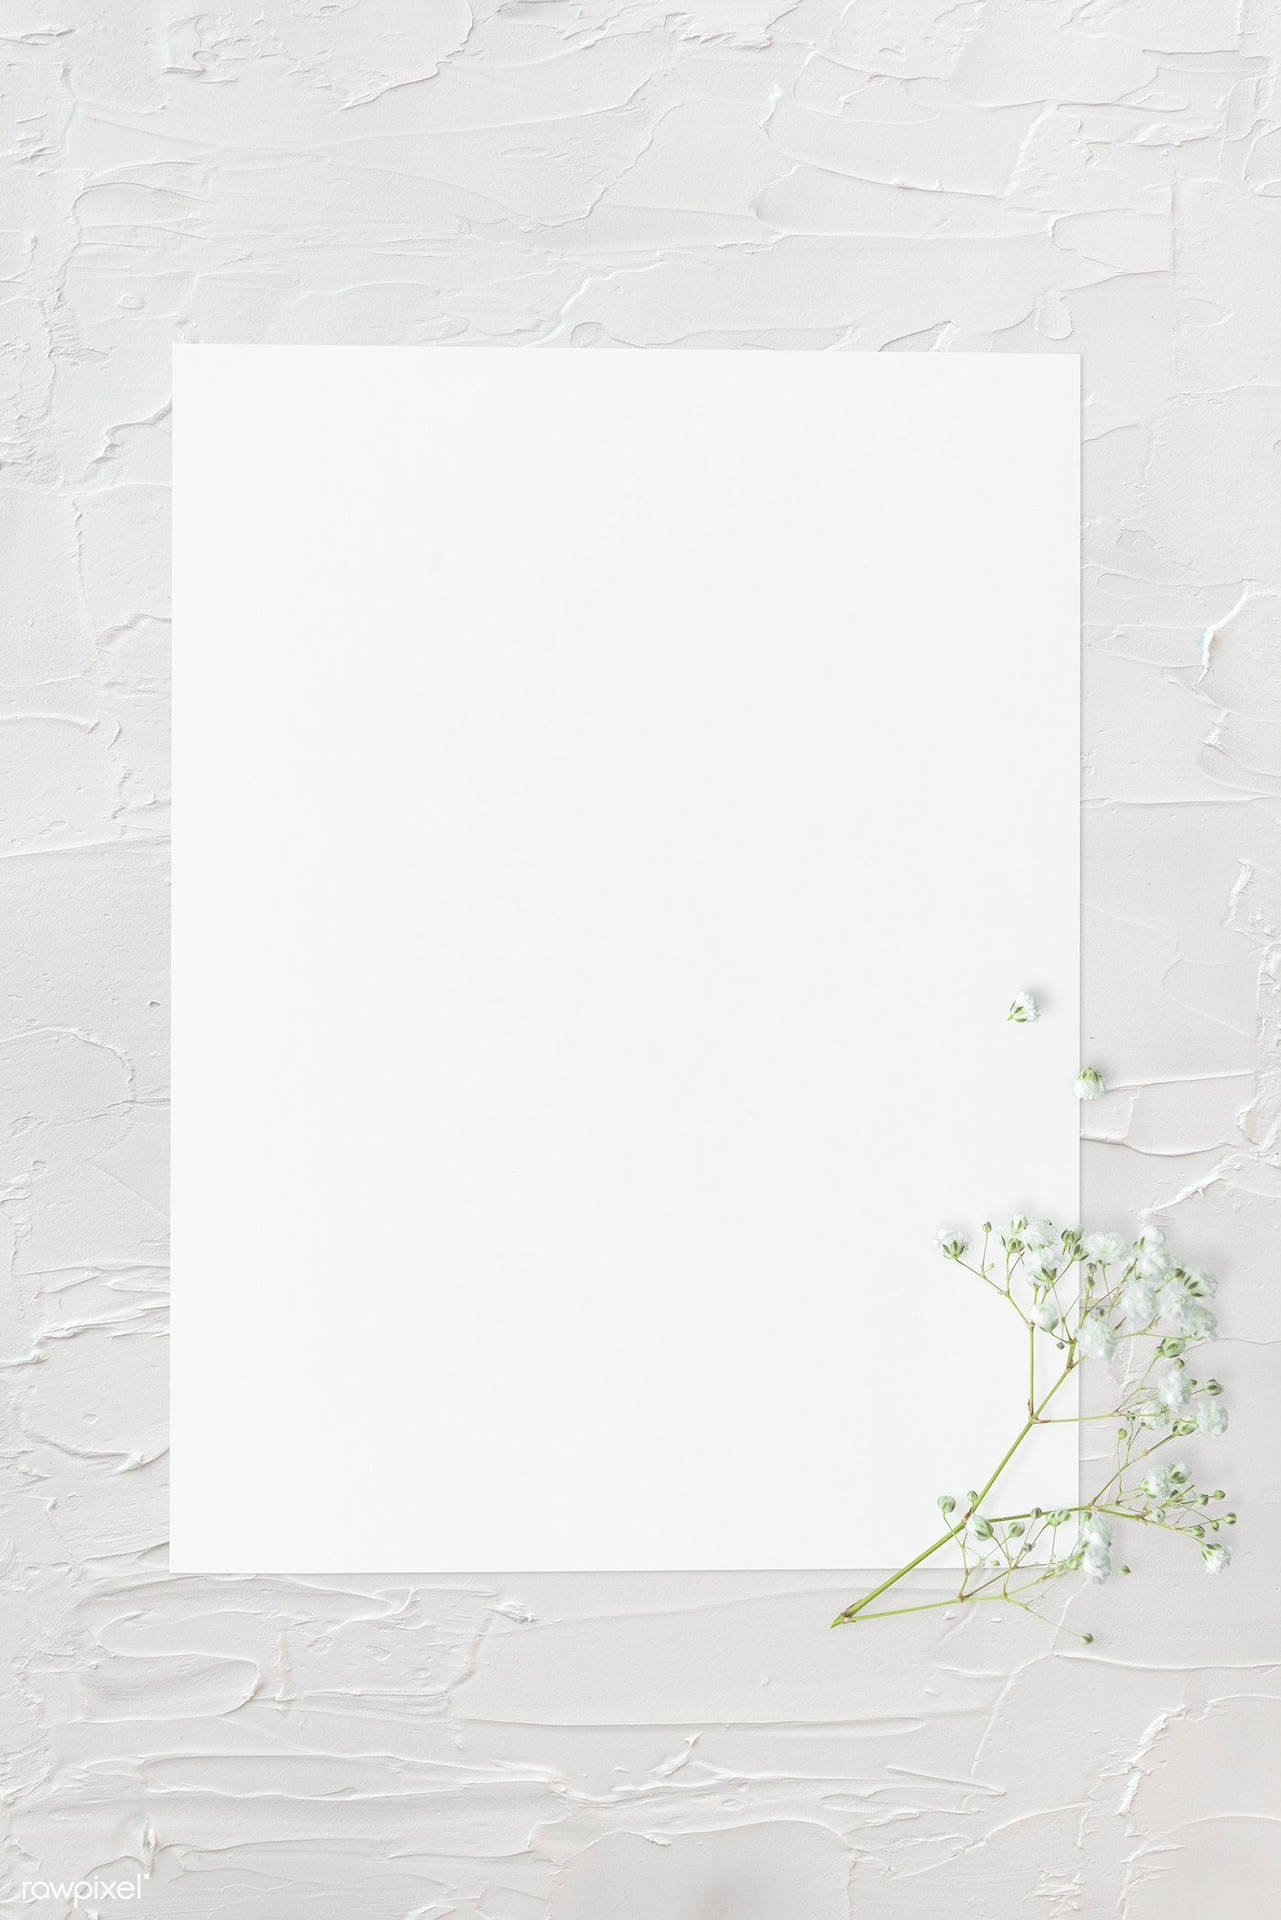 Download Blank White With Frame And White Flowers Wallpaper